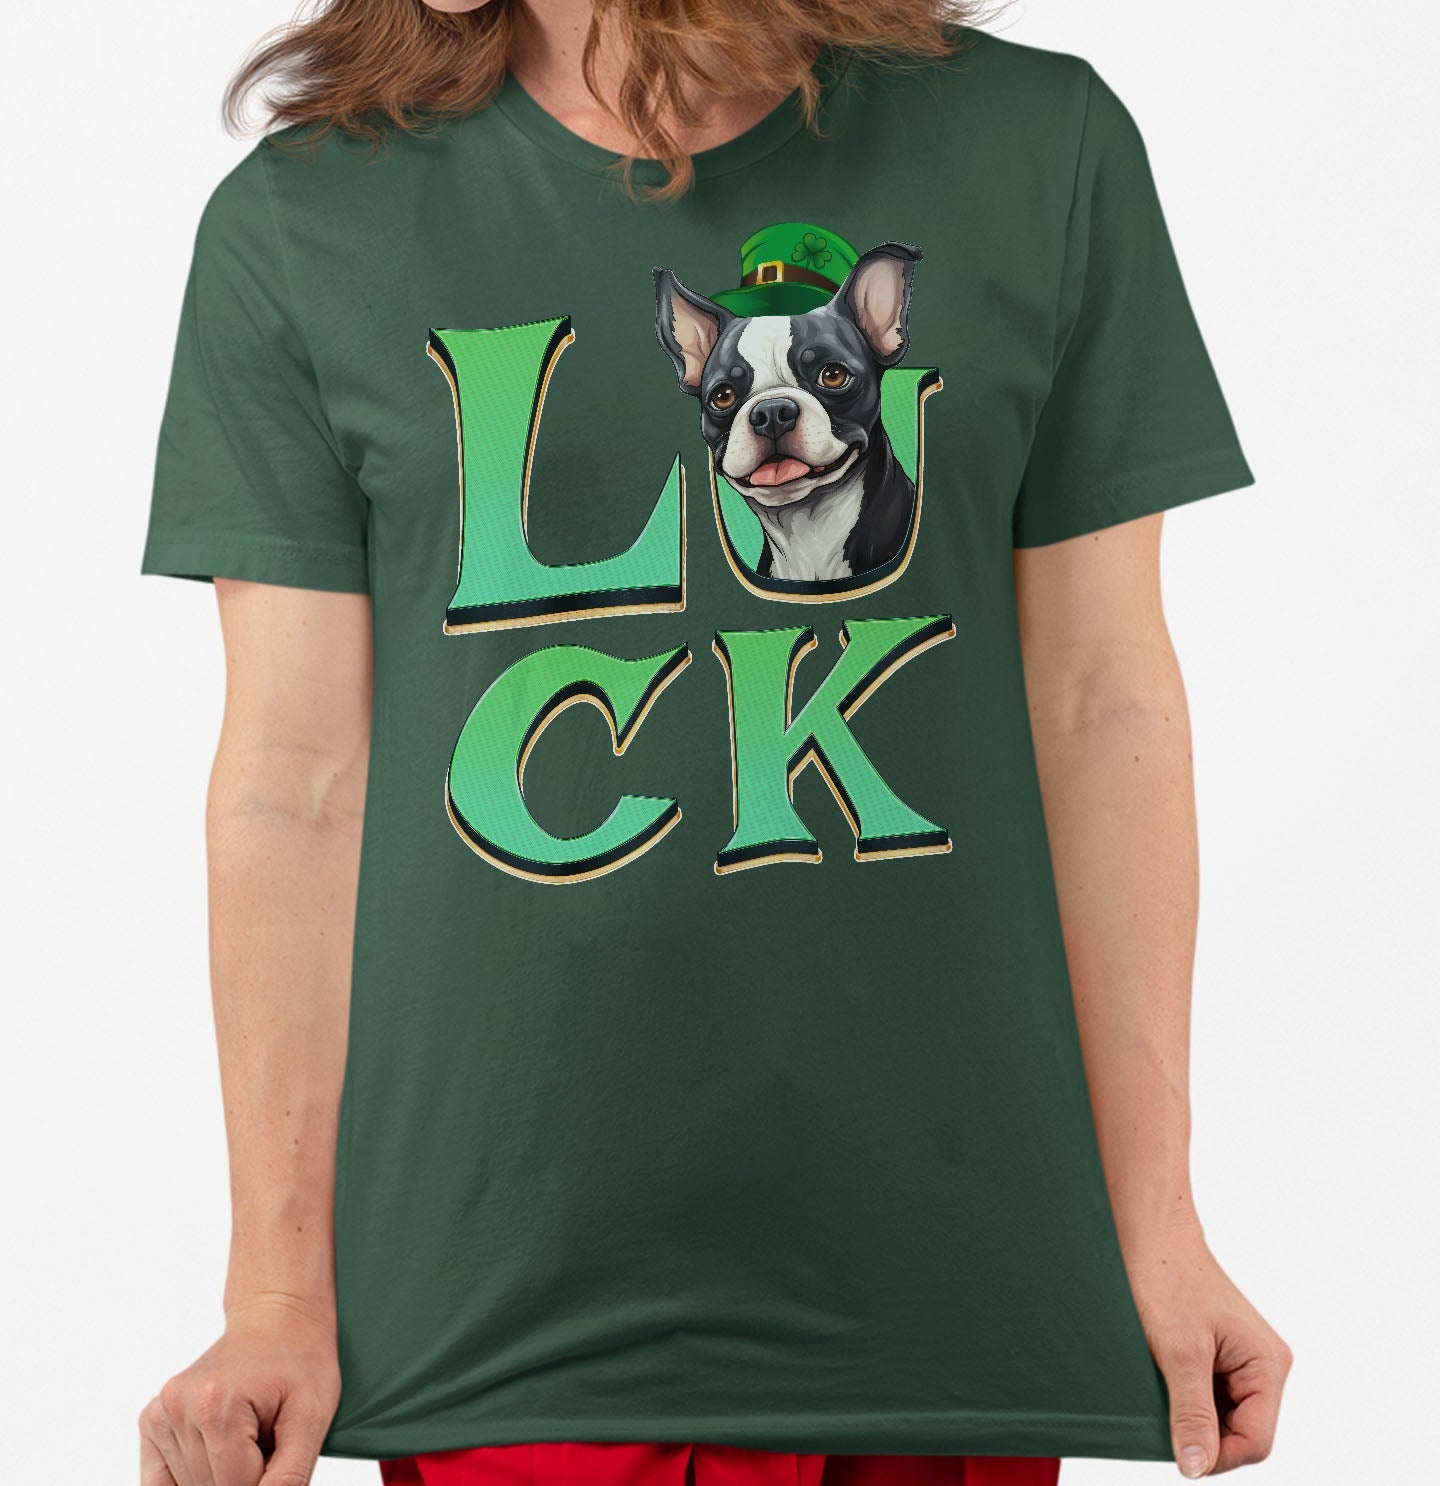 Big LUCK St. Patrick's Day Boston Terrier - Adult Unisex T-Shirt